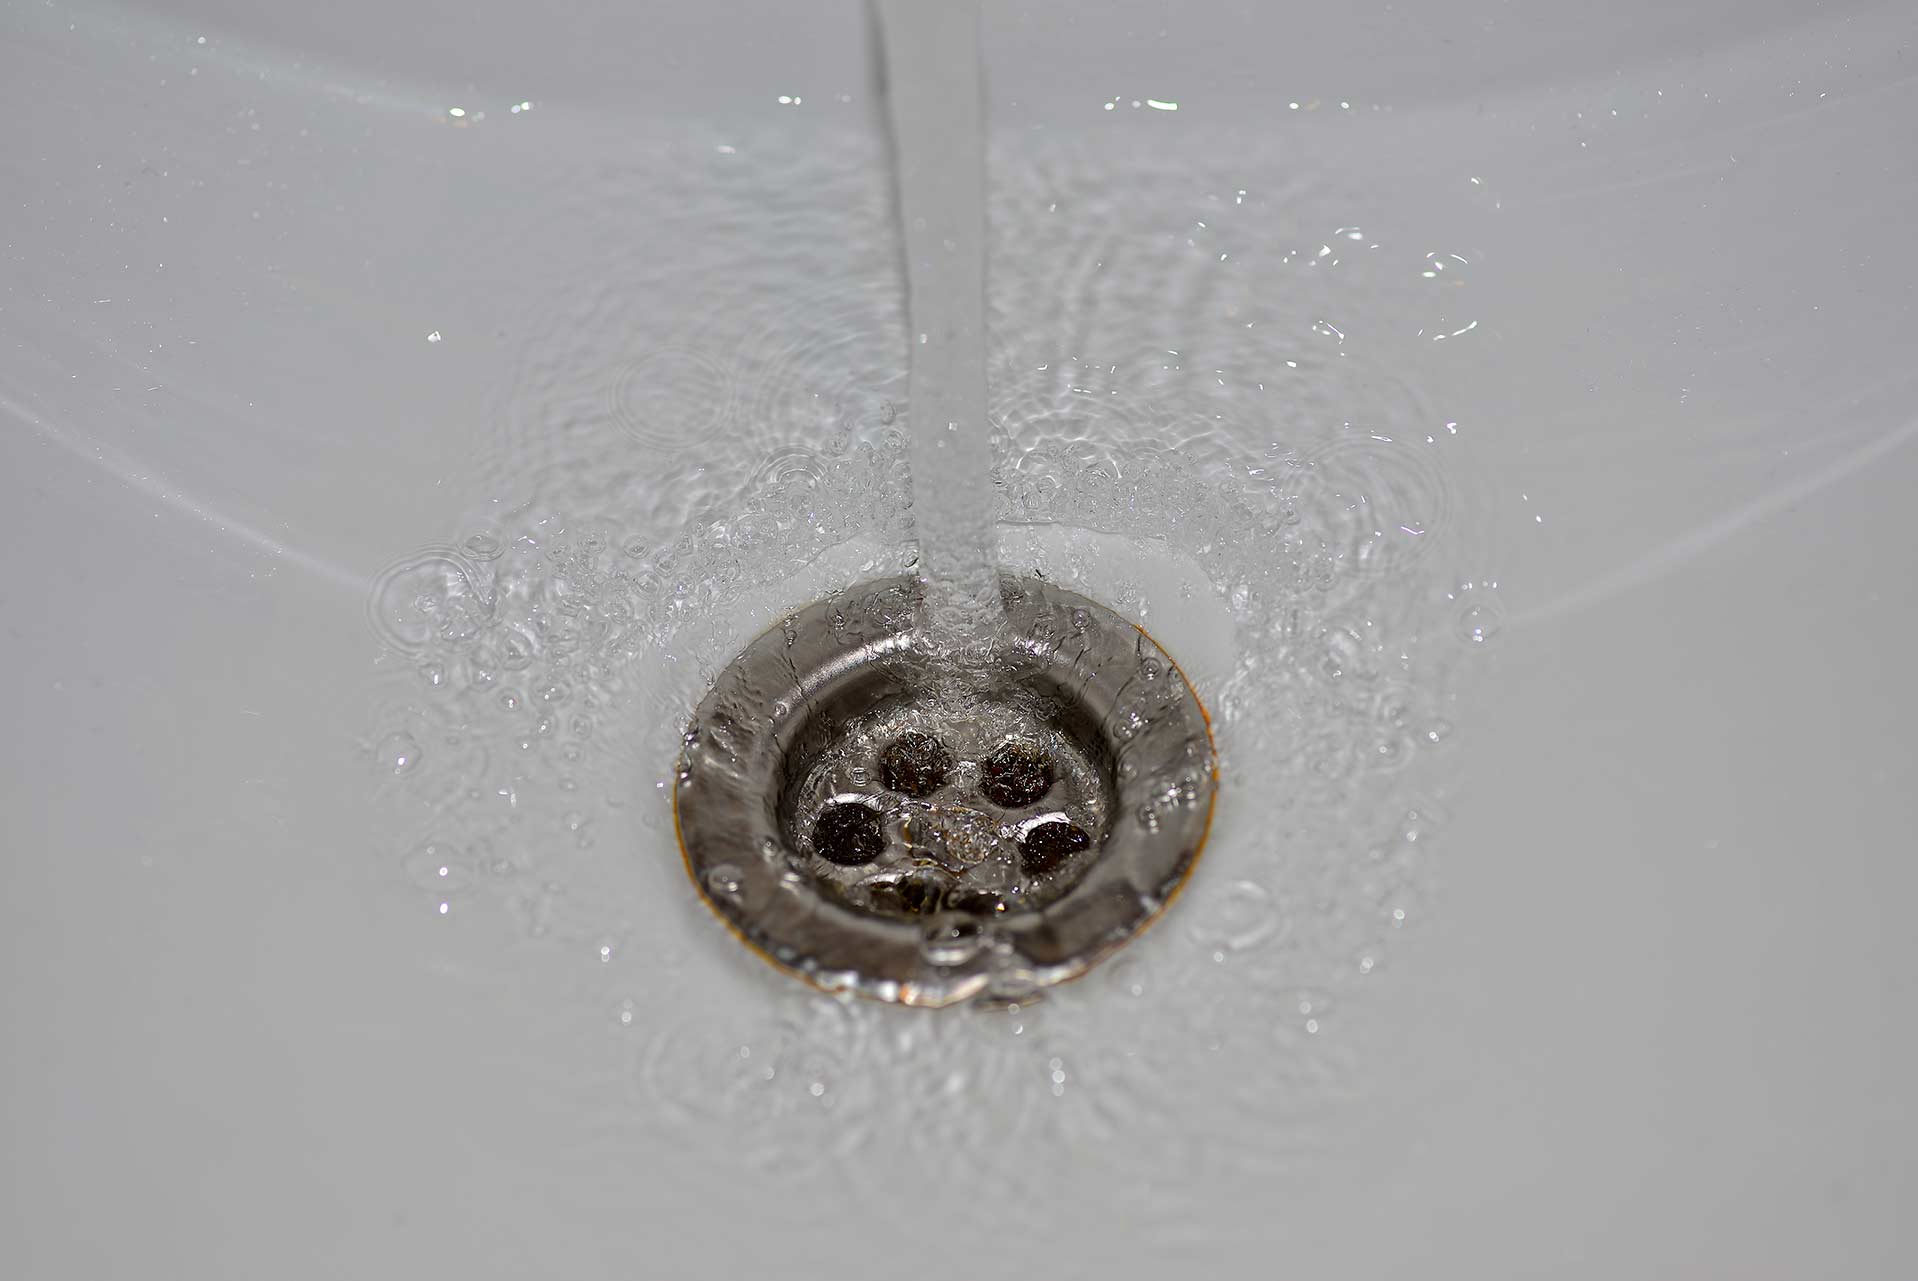 A2B Drains provides services to unblock blocked sinks and drains for properties in Winsford.